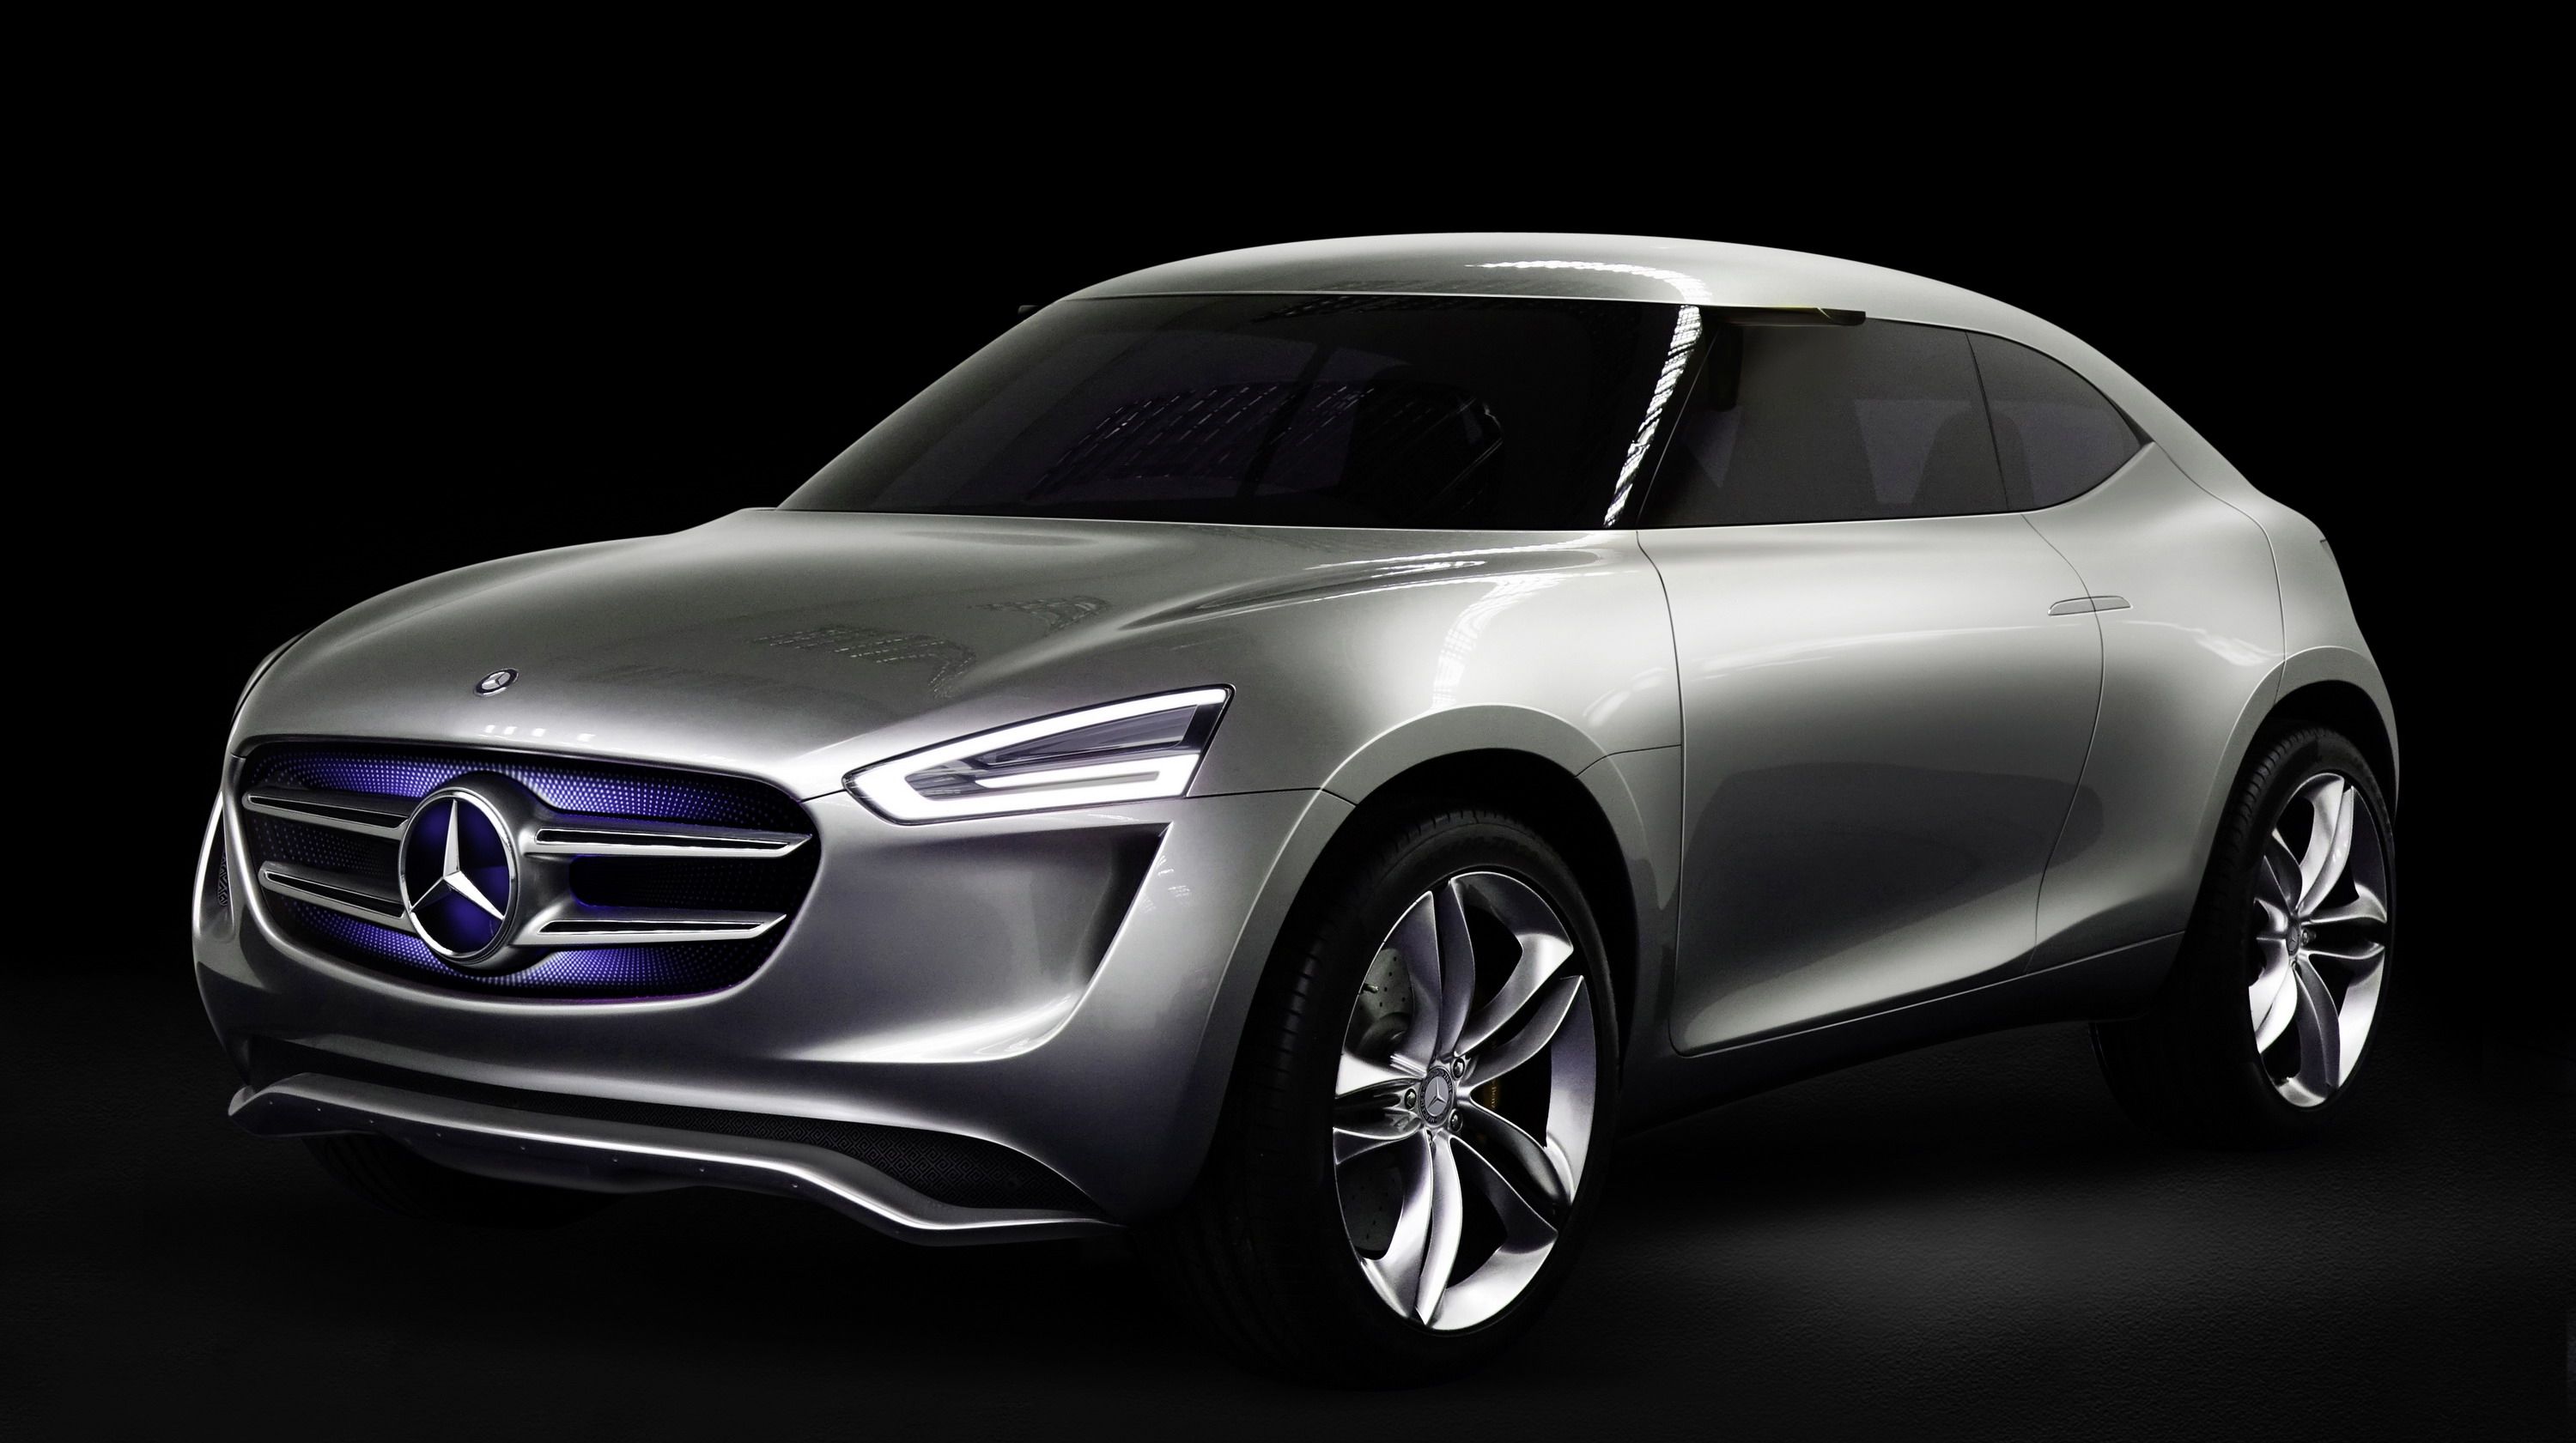  The Mercedes-Benz Vision G-Code Concept is likely the funkiest and most interesting concept of 2014. 